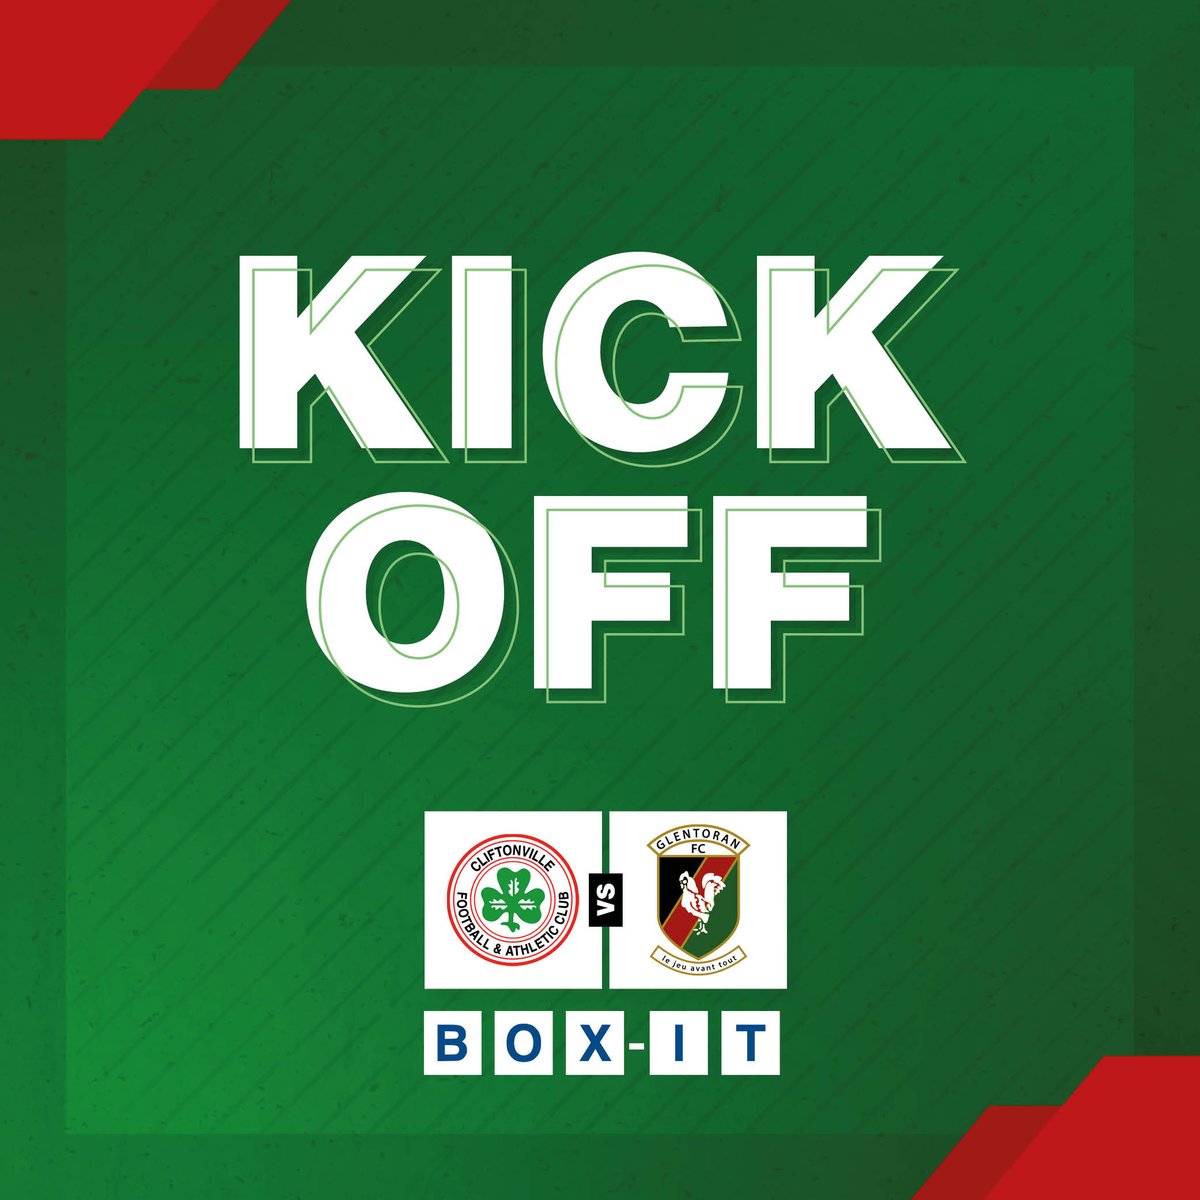 𝗞𝗜𝗖𝗞 𝗢𝗙𝗙! 💚 🐓 We're underway at Solitude, COME ON YOU GLENS!